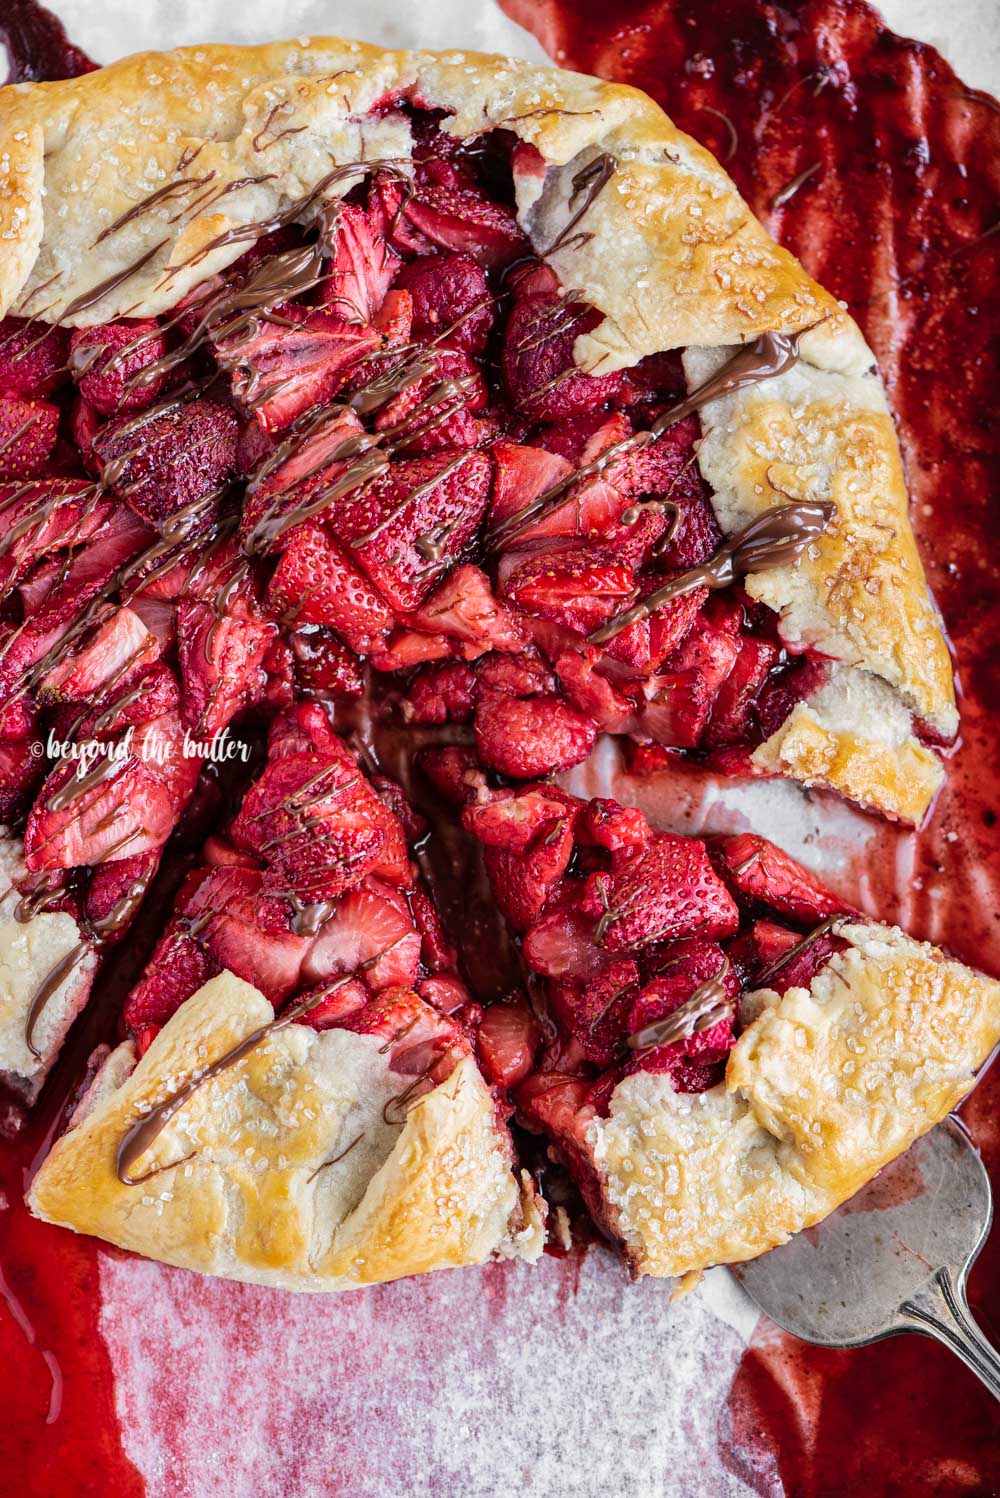 Overhead image of a Berry Nutella Galette on a baking sheet with Nutella drizzled over the top and 2 slices cut | All Images © Beyond the Butter™